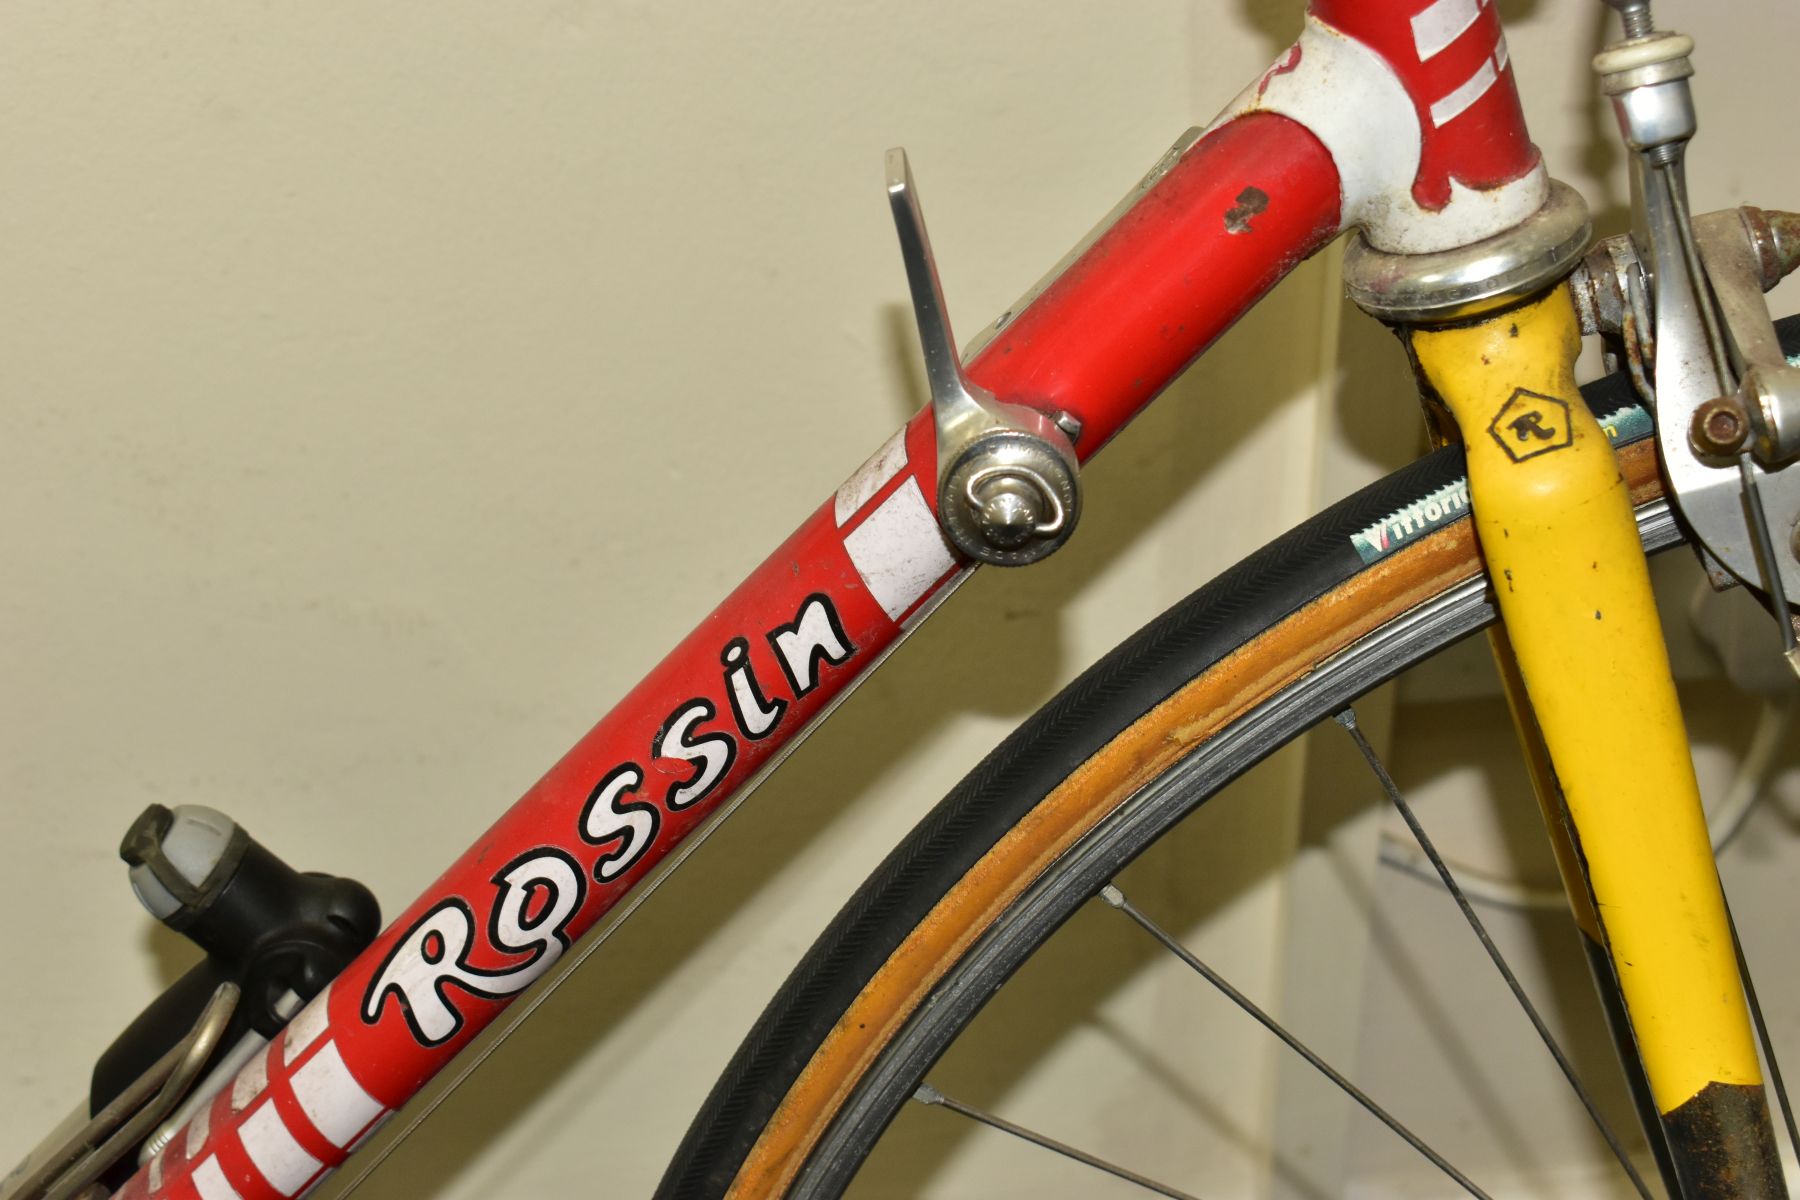 A VINTAGE ROSSIN RACING BICYCLE CIRCA 1980s, fitted with a Campagnolo front crank set and chain - Bild 3 aus 14